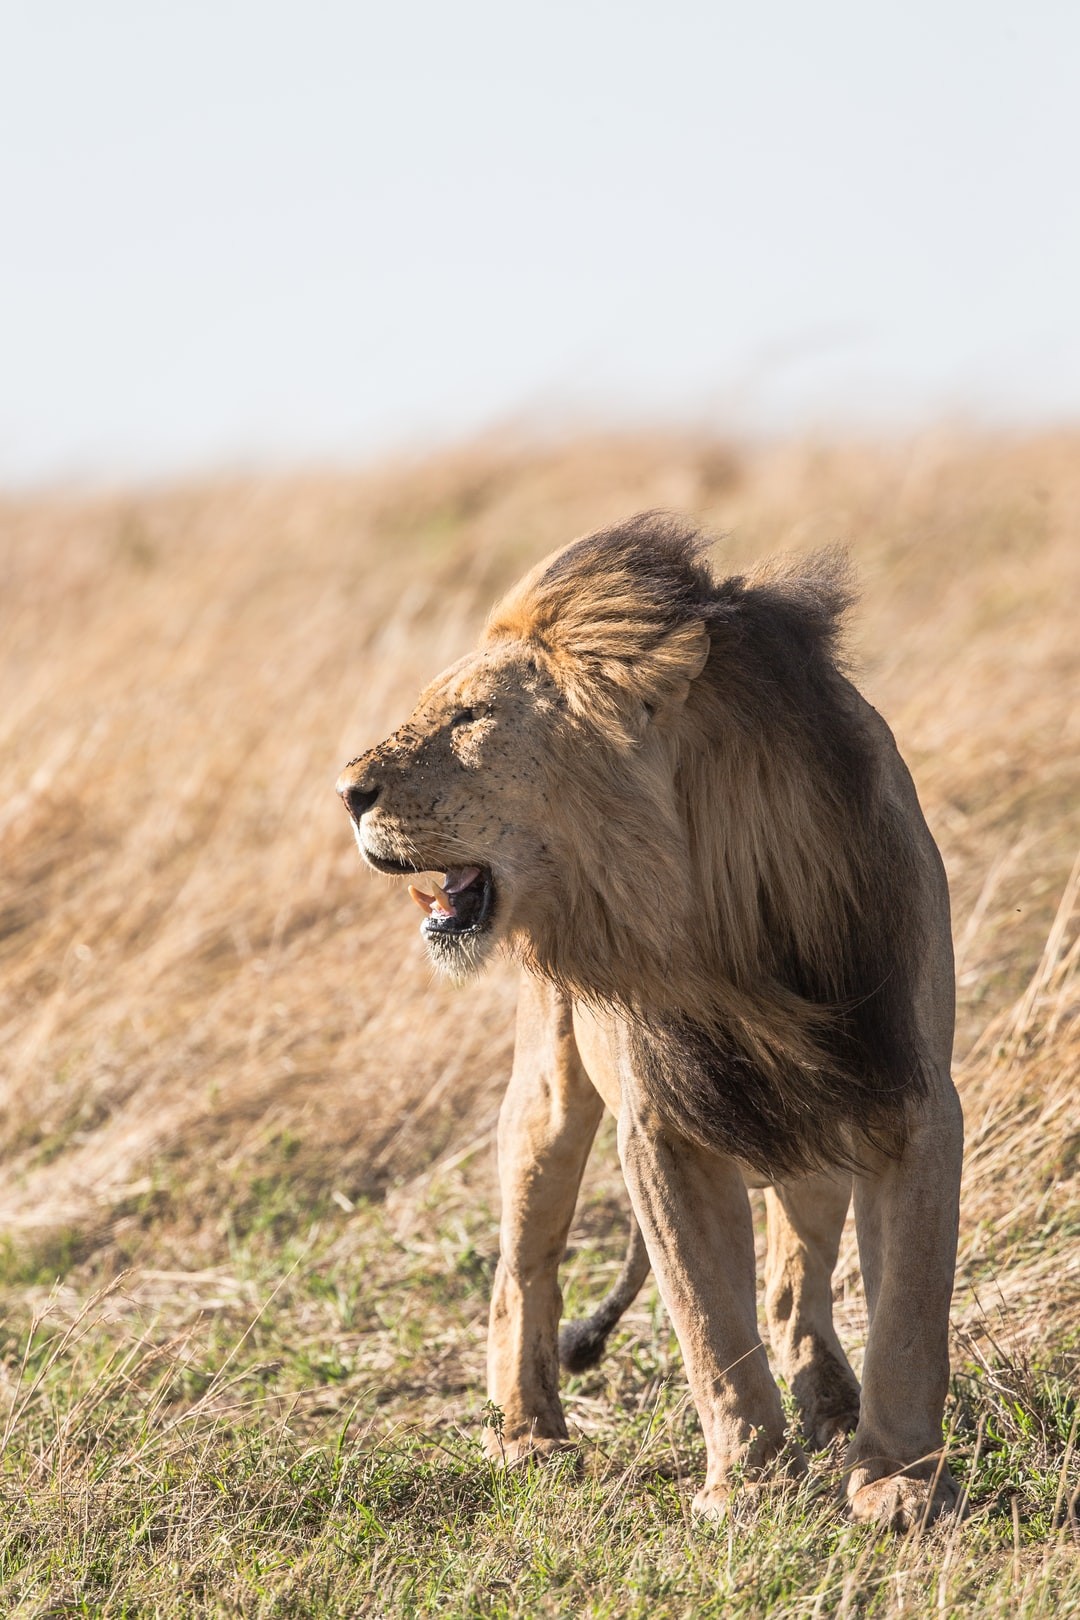 Lion wandering in the African Trails of Tanzania's National Park